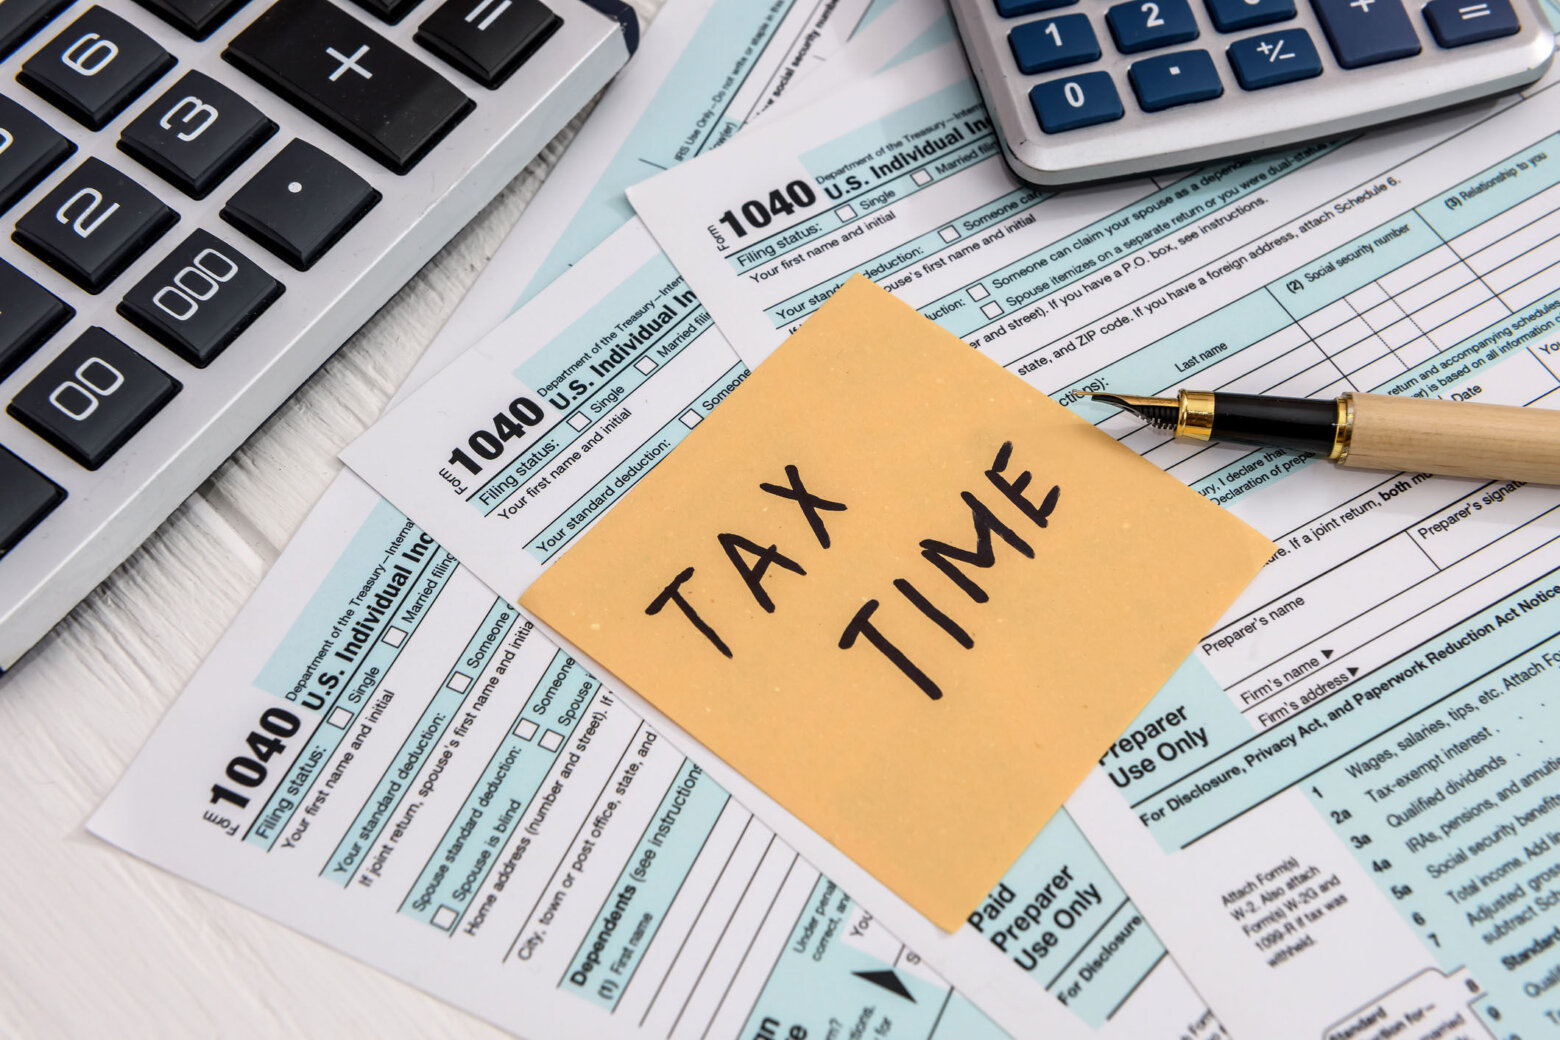 Tuesday is Virginia’s deadline for individual tax returns and getting